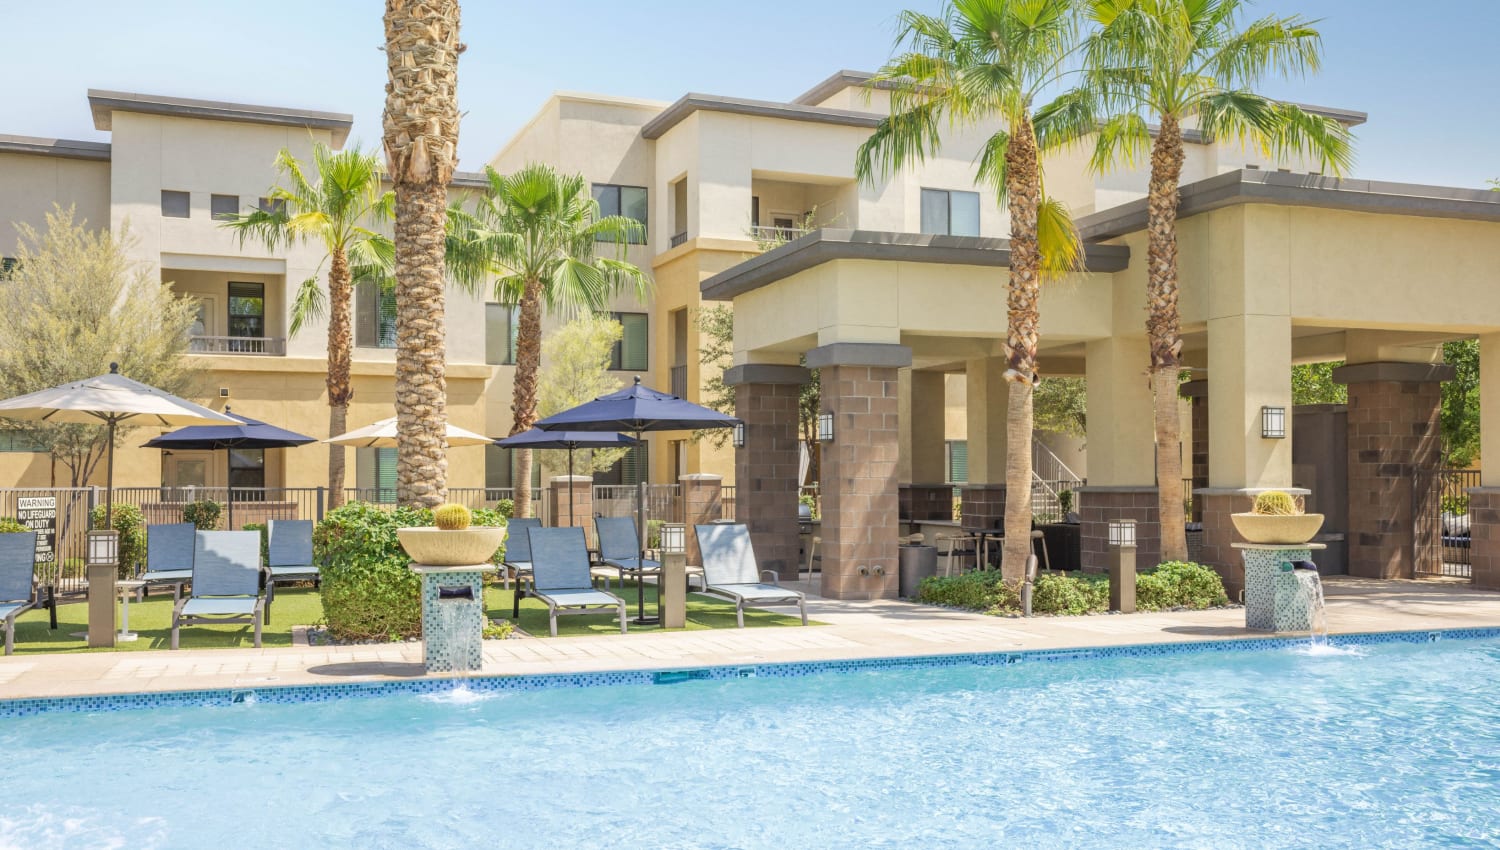 Outdoor pool with shaded seating at Cadia Crossing in Gilbert, Arizona